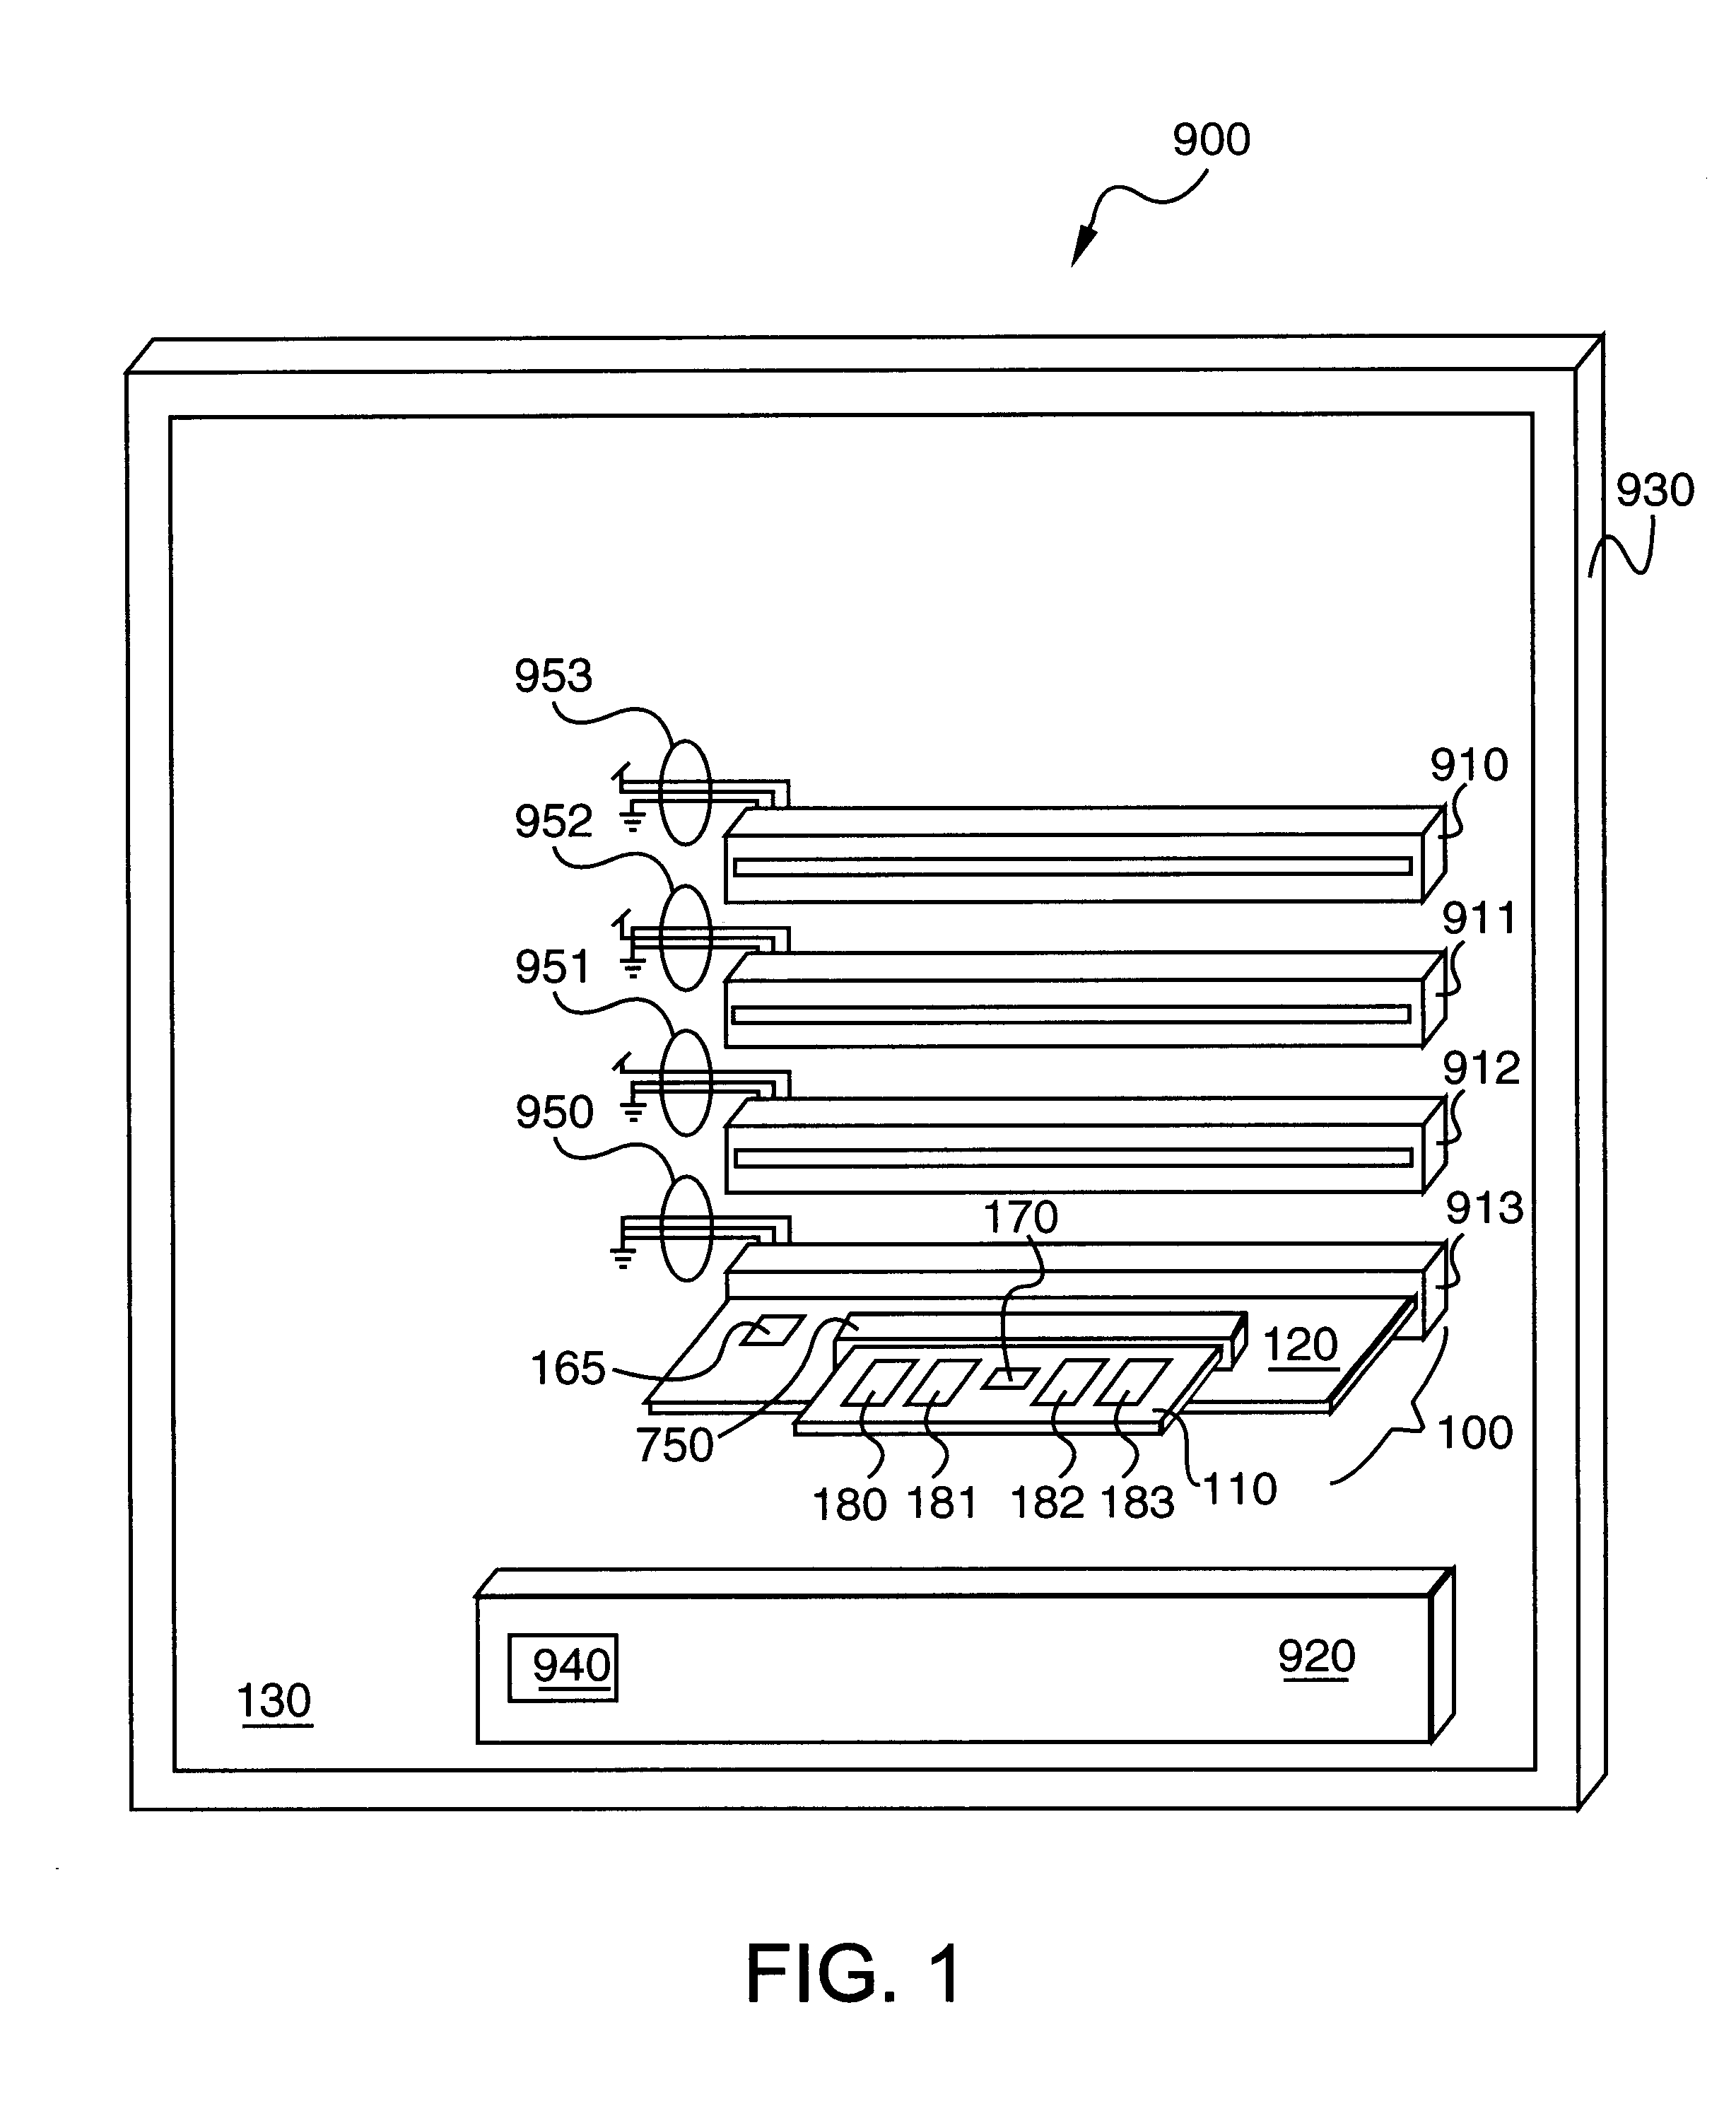 Interface that allows testing and using memory modules in computer systems not designed for the modules